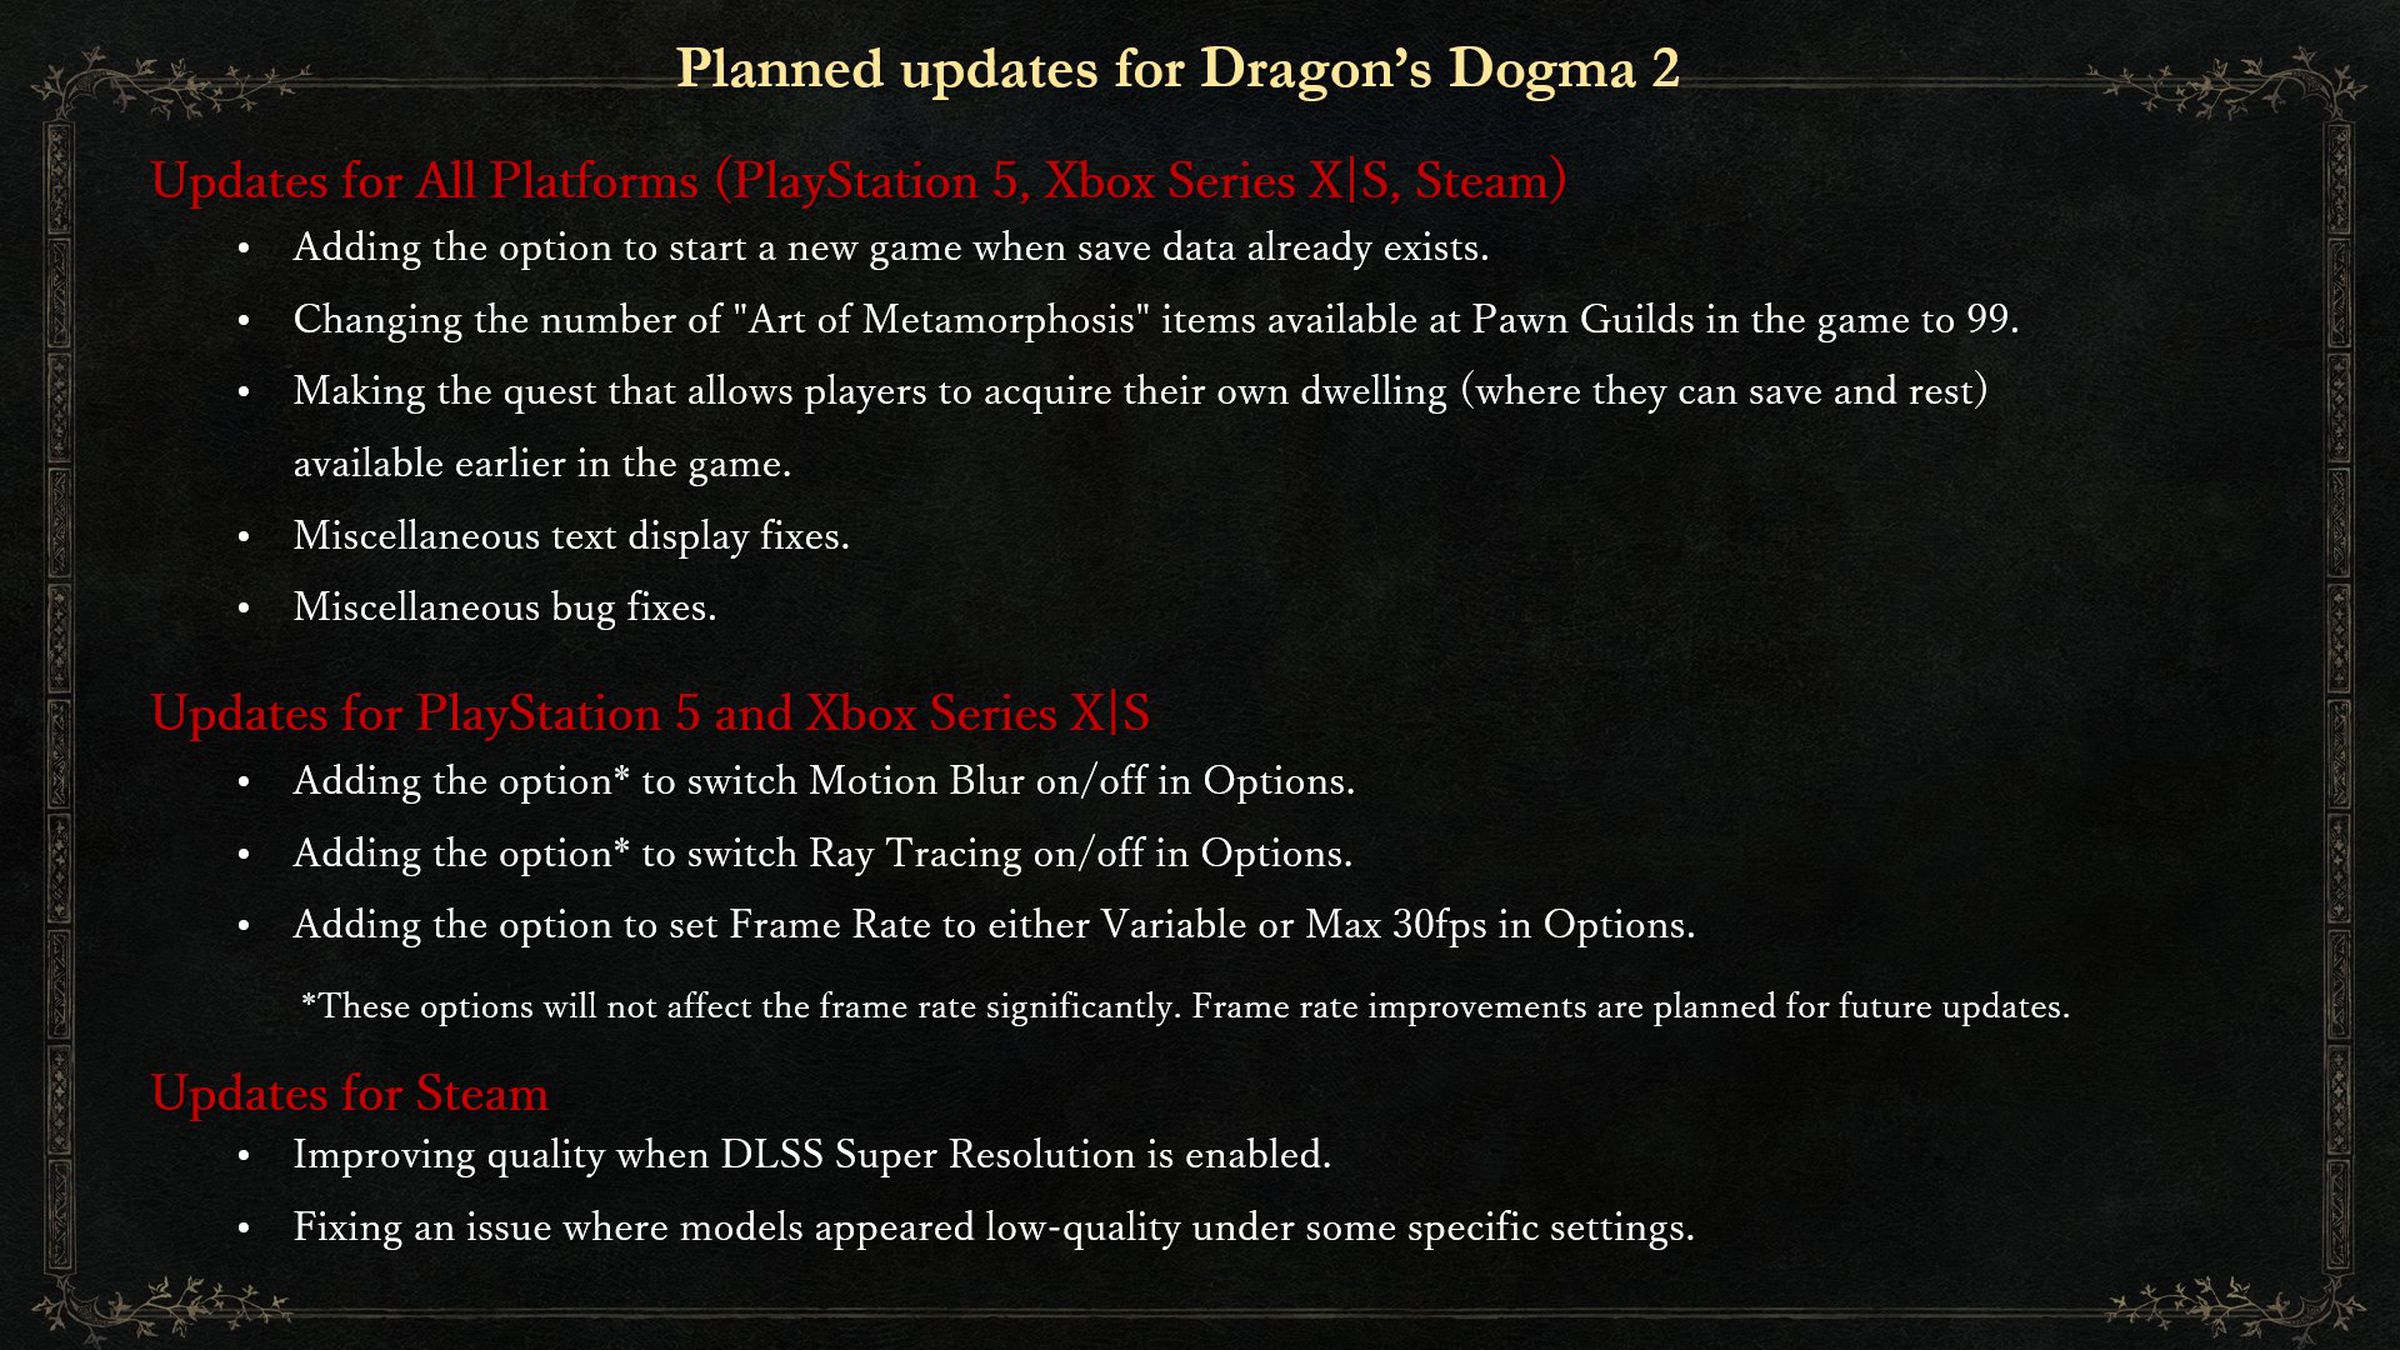 An image showing planned updates for Dragon’s Dogma 2.